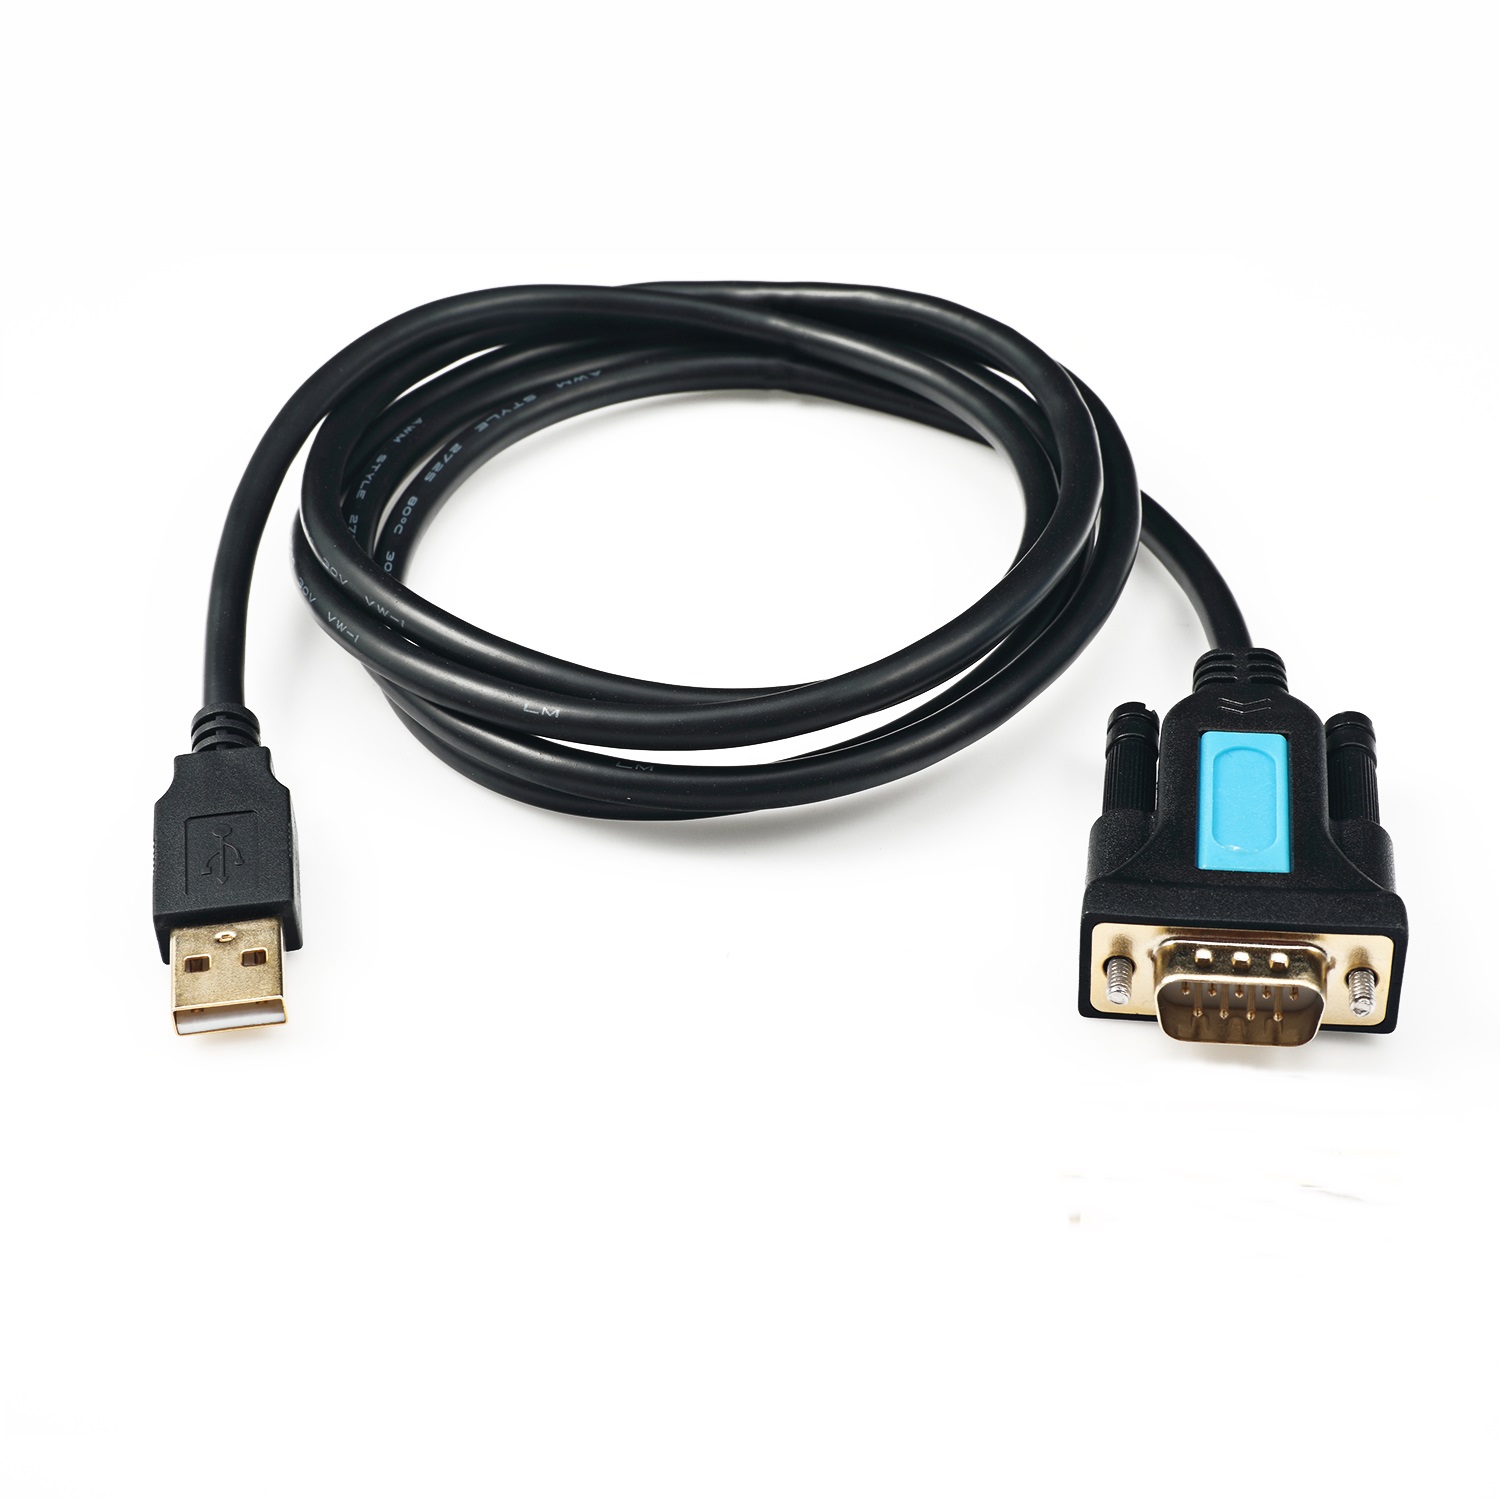 CABLEDECONN USB to DB9 Pin RS232 Cable with PL2302 Chipset,2m 6.6FT USB2.0 to RS232 Male DB9 Adapter Converter for Windows XP,Windows Vista,7,8,10,Mac OS Linux C0201